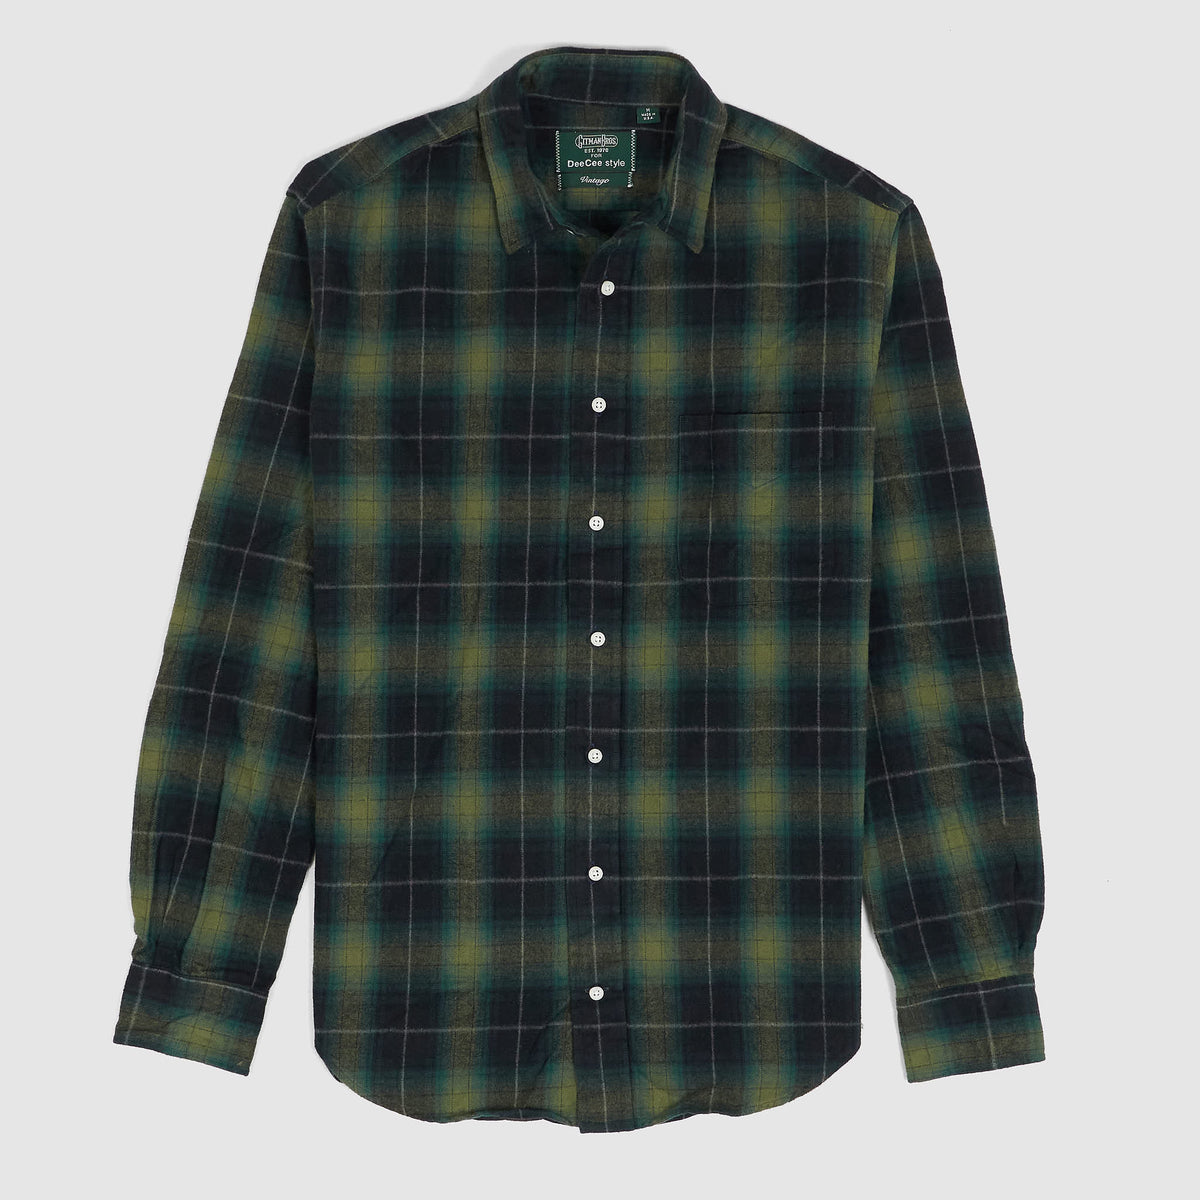 Gitman Vintage for DeeCee style Plaid Cotton Flannel Shirt with Pocket